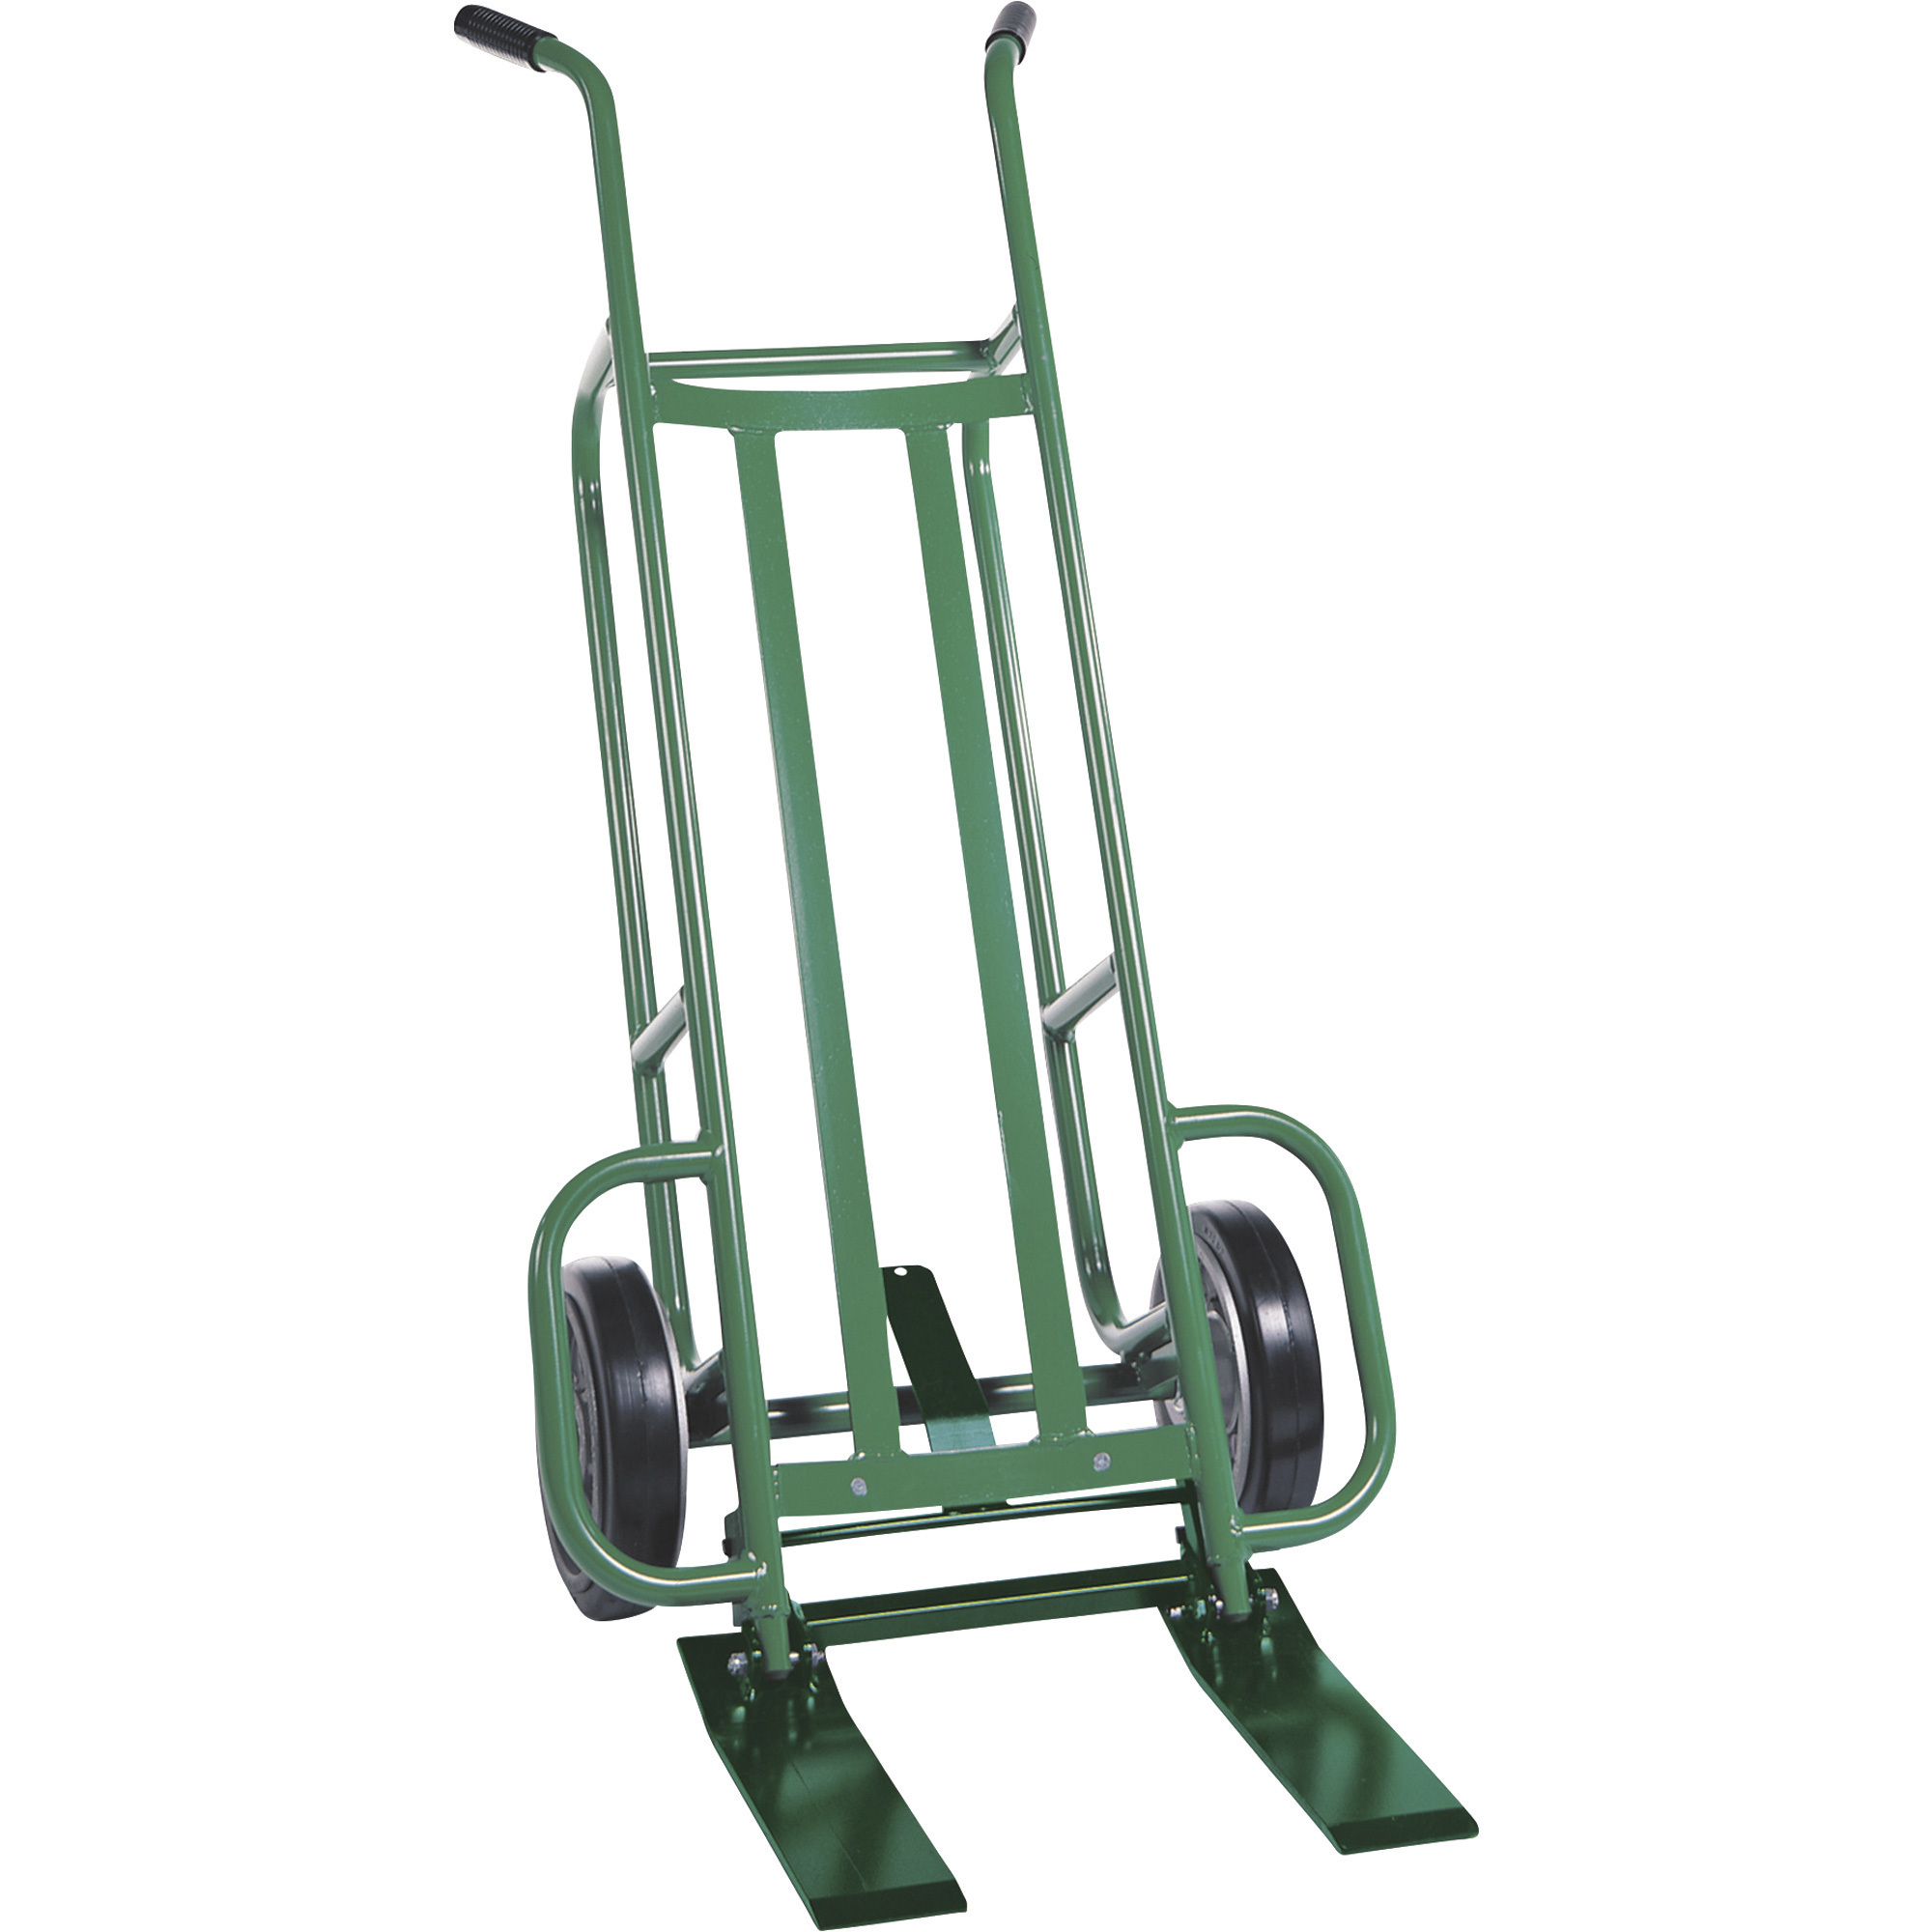 Valley Craft 2-Wheel Pallet Hand Truck, Steel, (2) Solid Rubber Wheels, 1000-Lb. Capacity, Spring-Loaded Pallet Forks, Model F84776A1